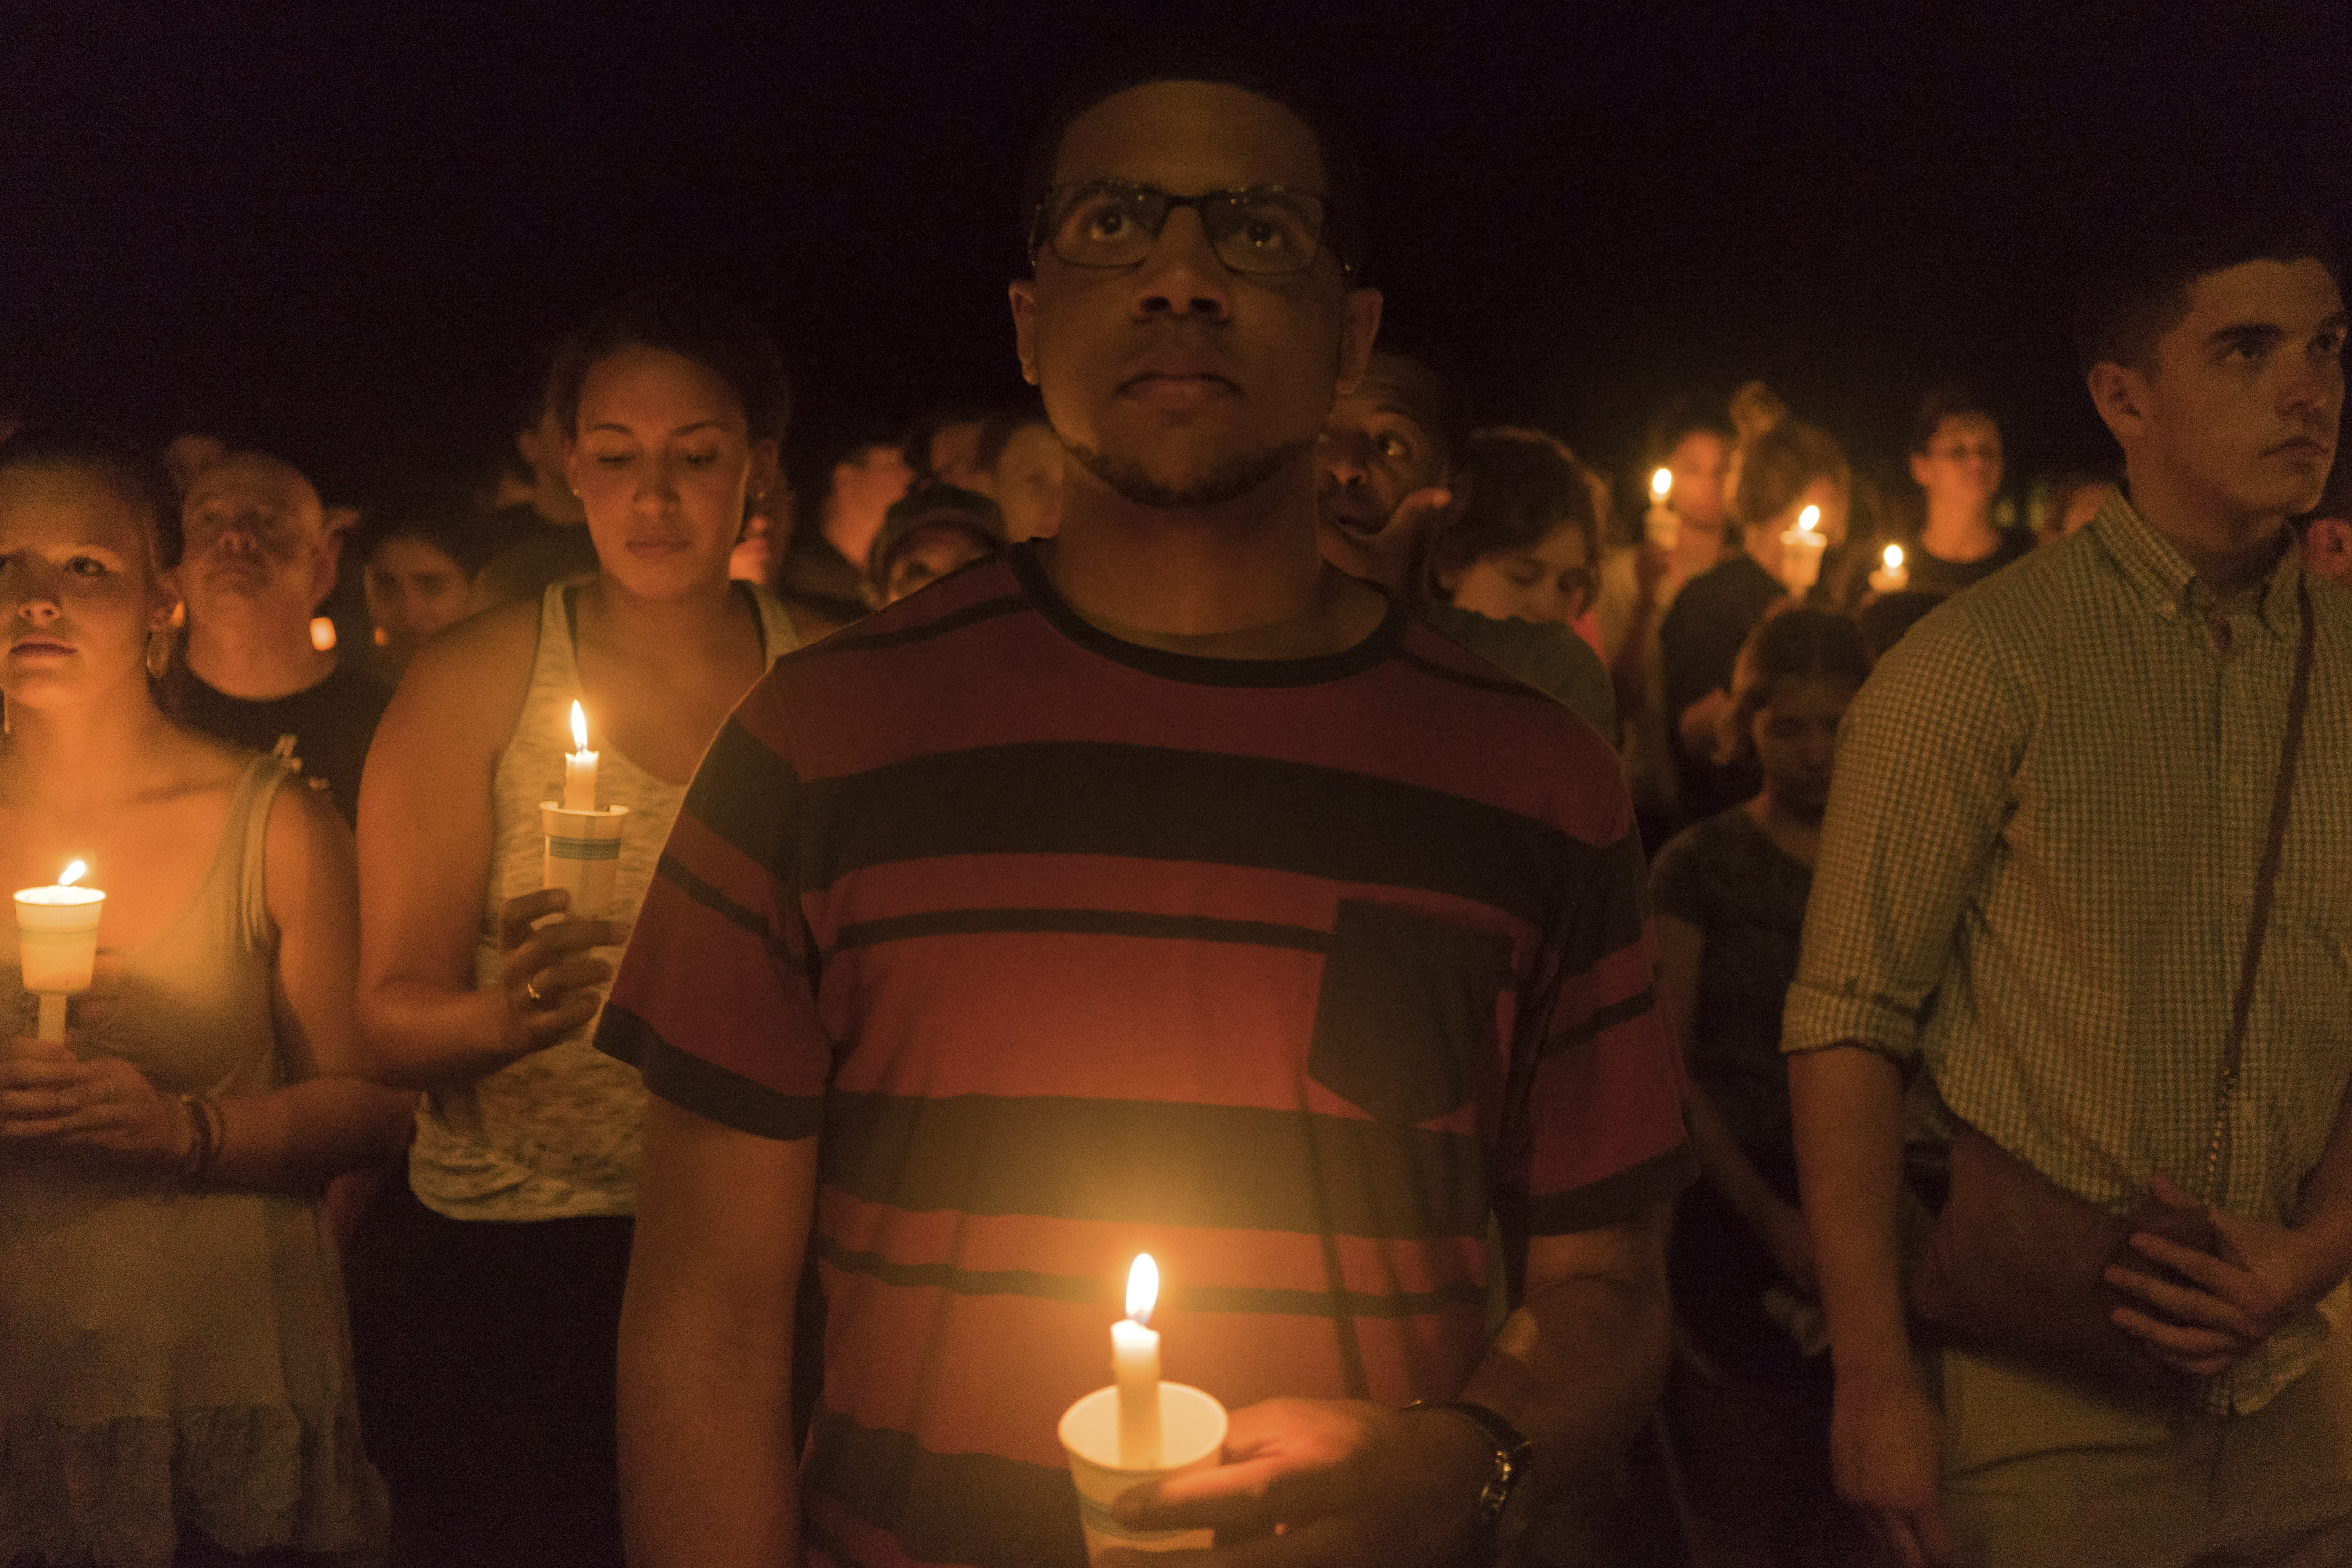 People gather for a candlelight vigil on the University of Virginia campus in Charlottesville on August 16, striking a peaceful contrast to the torches wielded by white supremacists days before